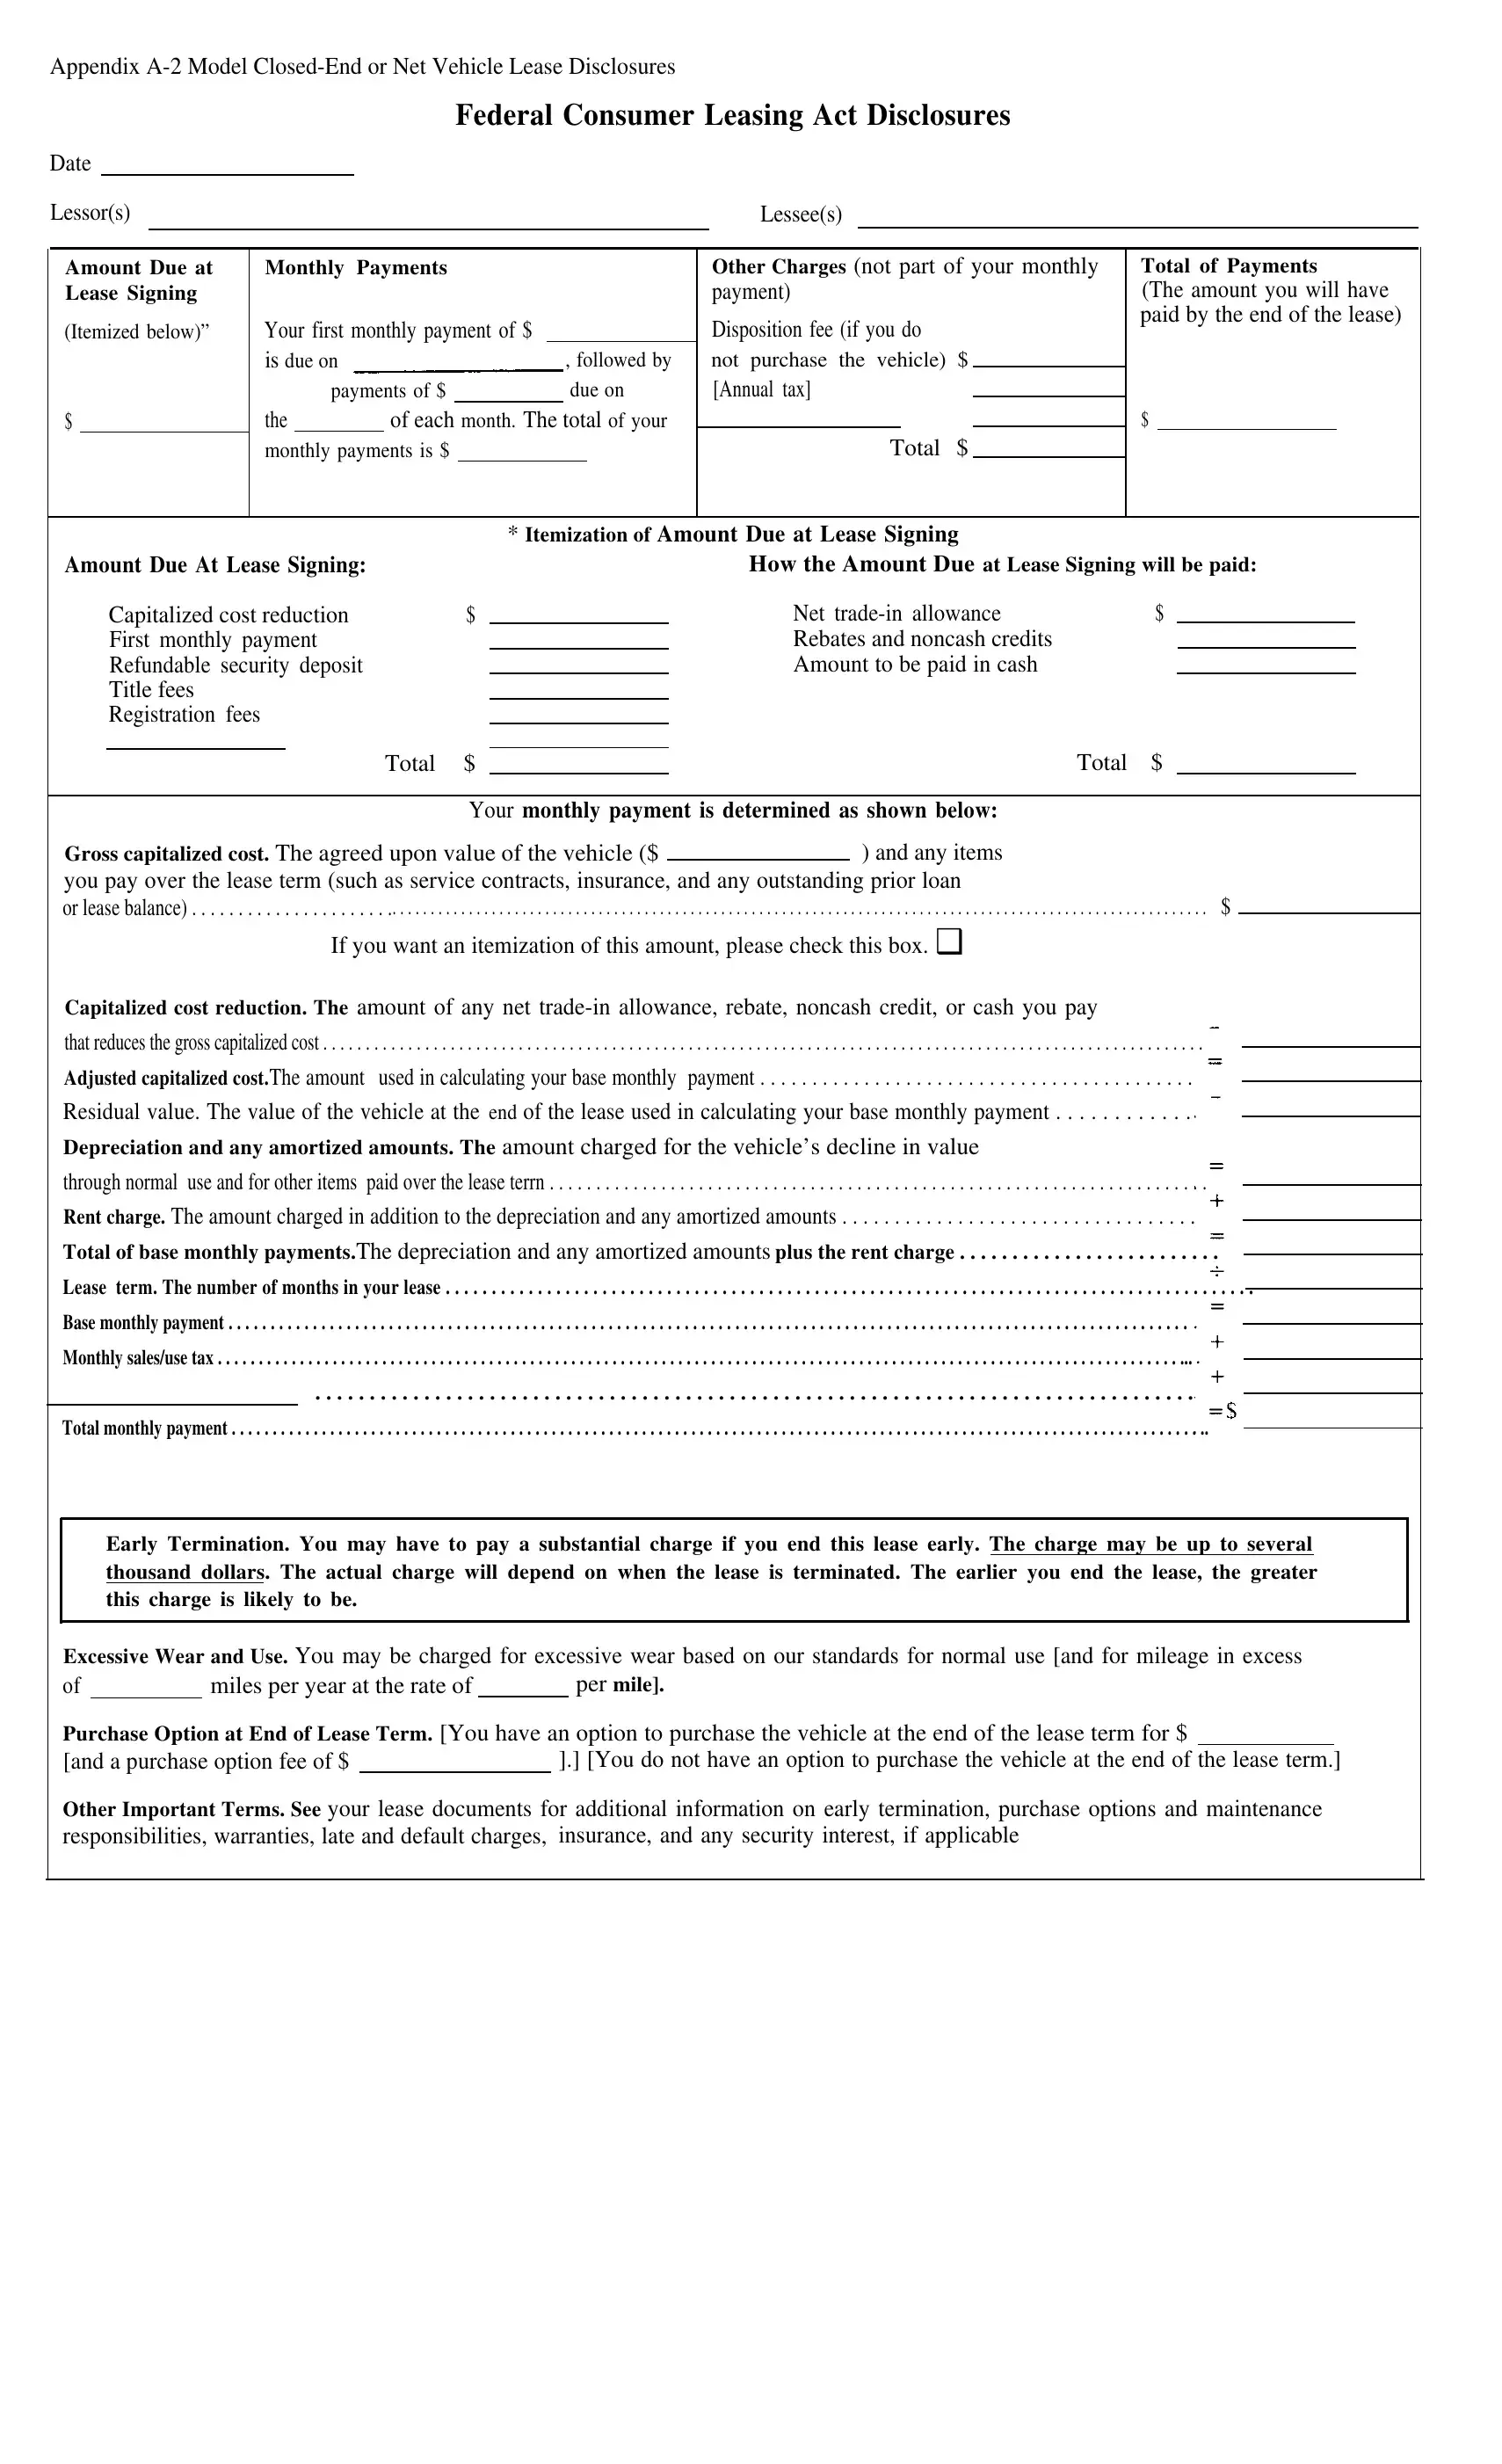 Federal Consumer Leasing Act Form Preview